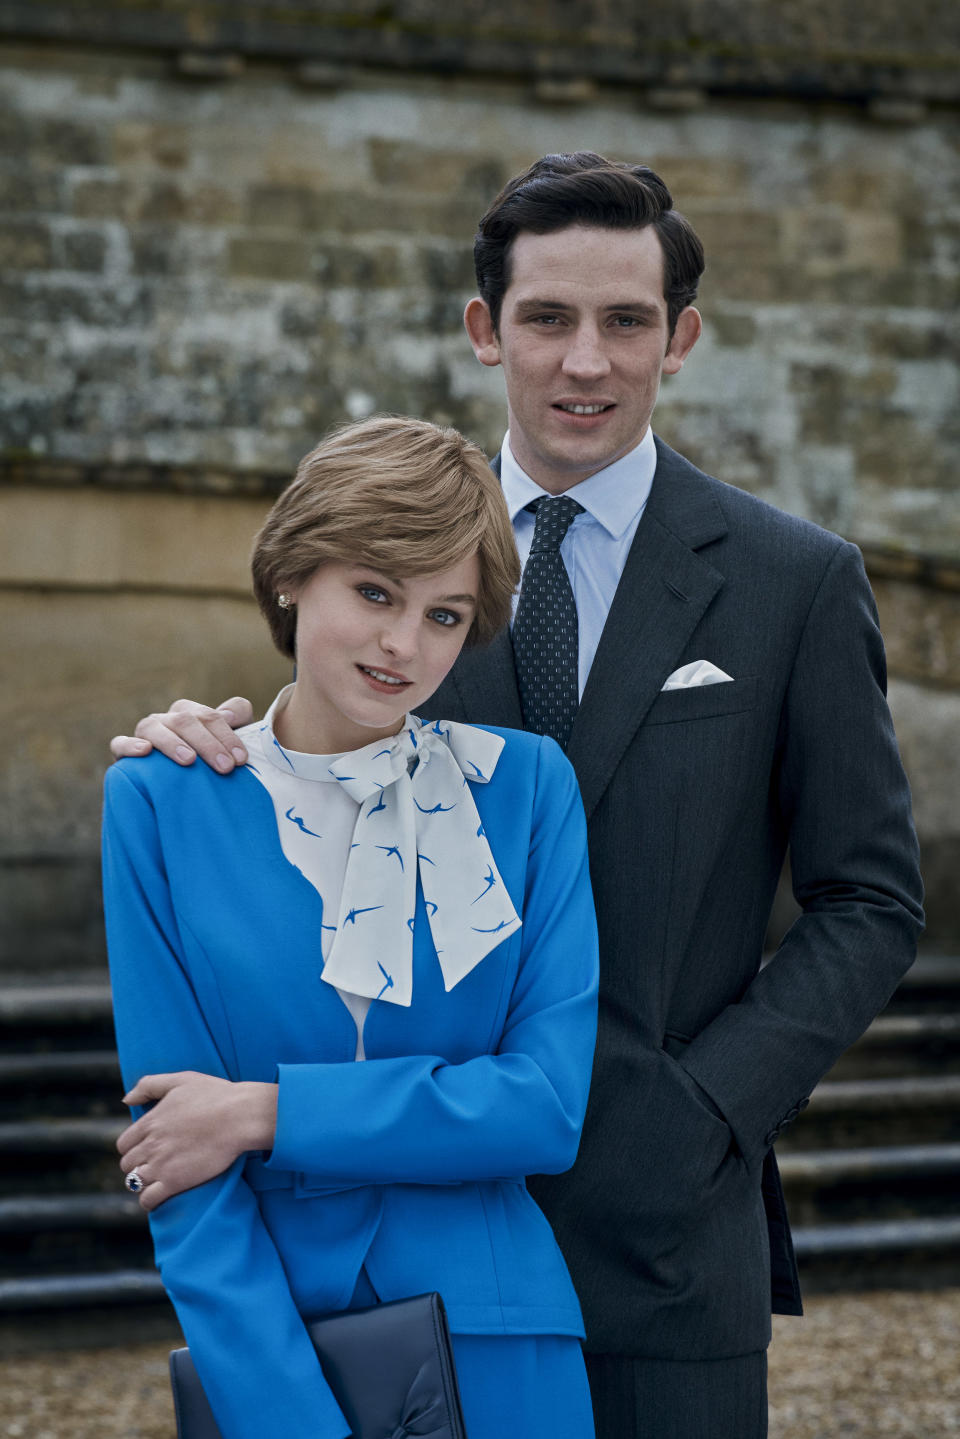 Image: Emma Corrin as Princess Diana and Josh O'Connor as Prince Charles in 'The Crown' (Des Willie / Netflix)